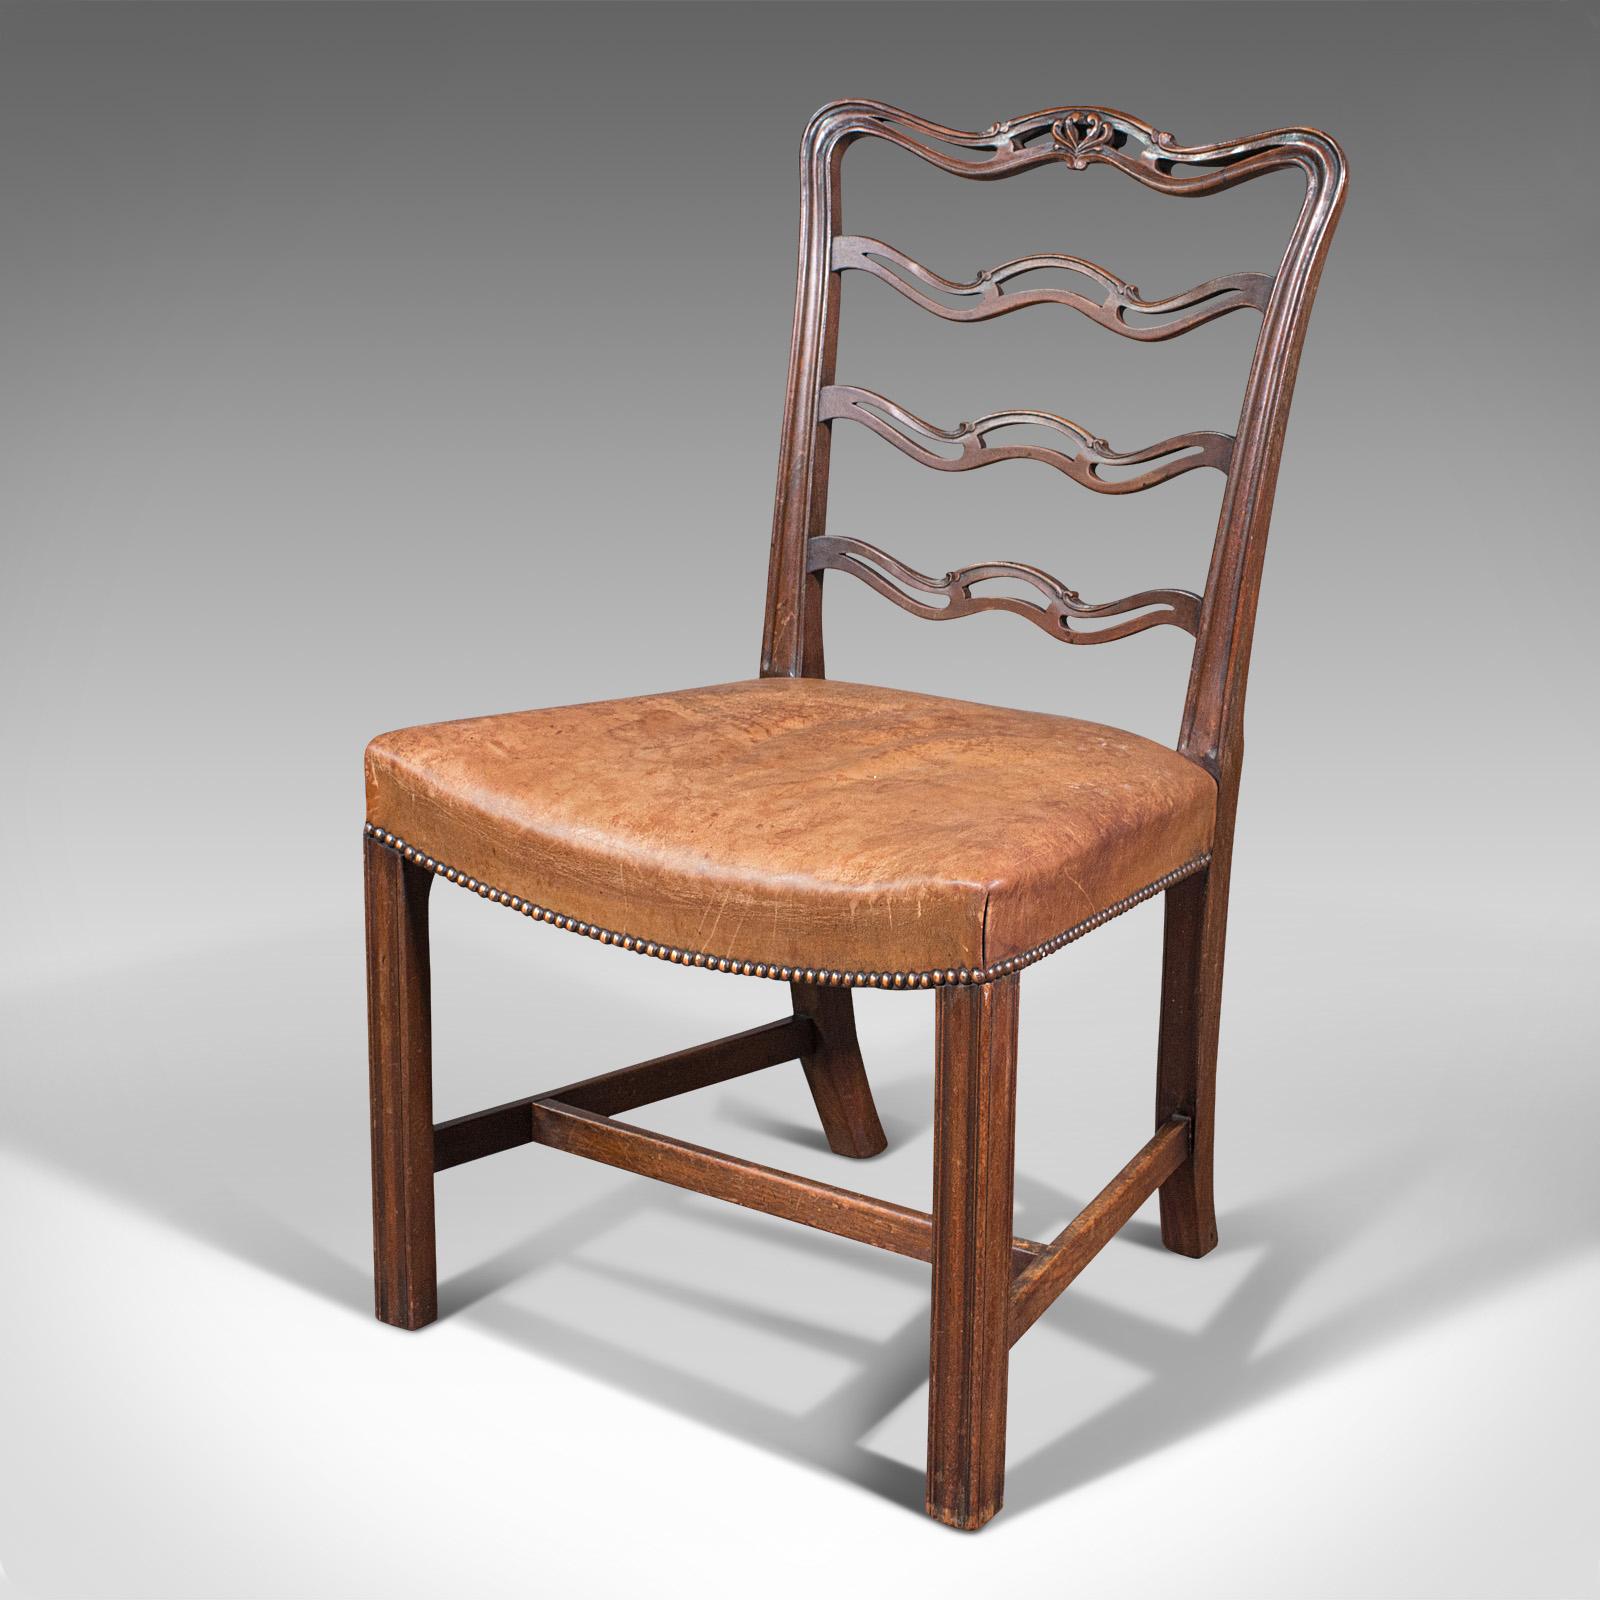 20th Century Set of 4 Vintage Ladder Back Chairs, Irish, Carver, Seat, Art Deco, Circa 1940 For Sale